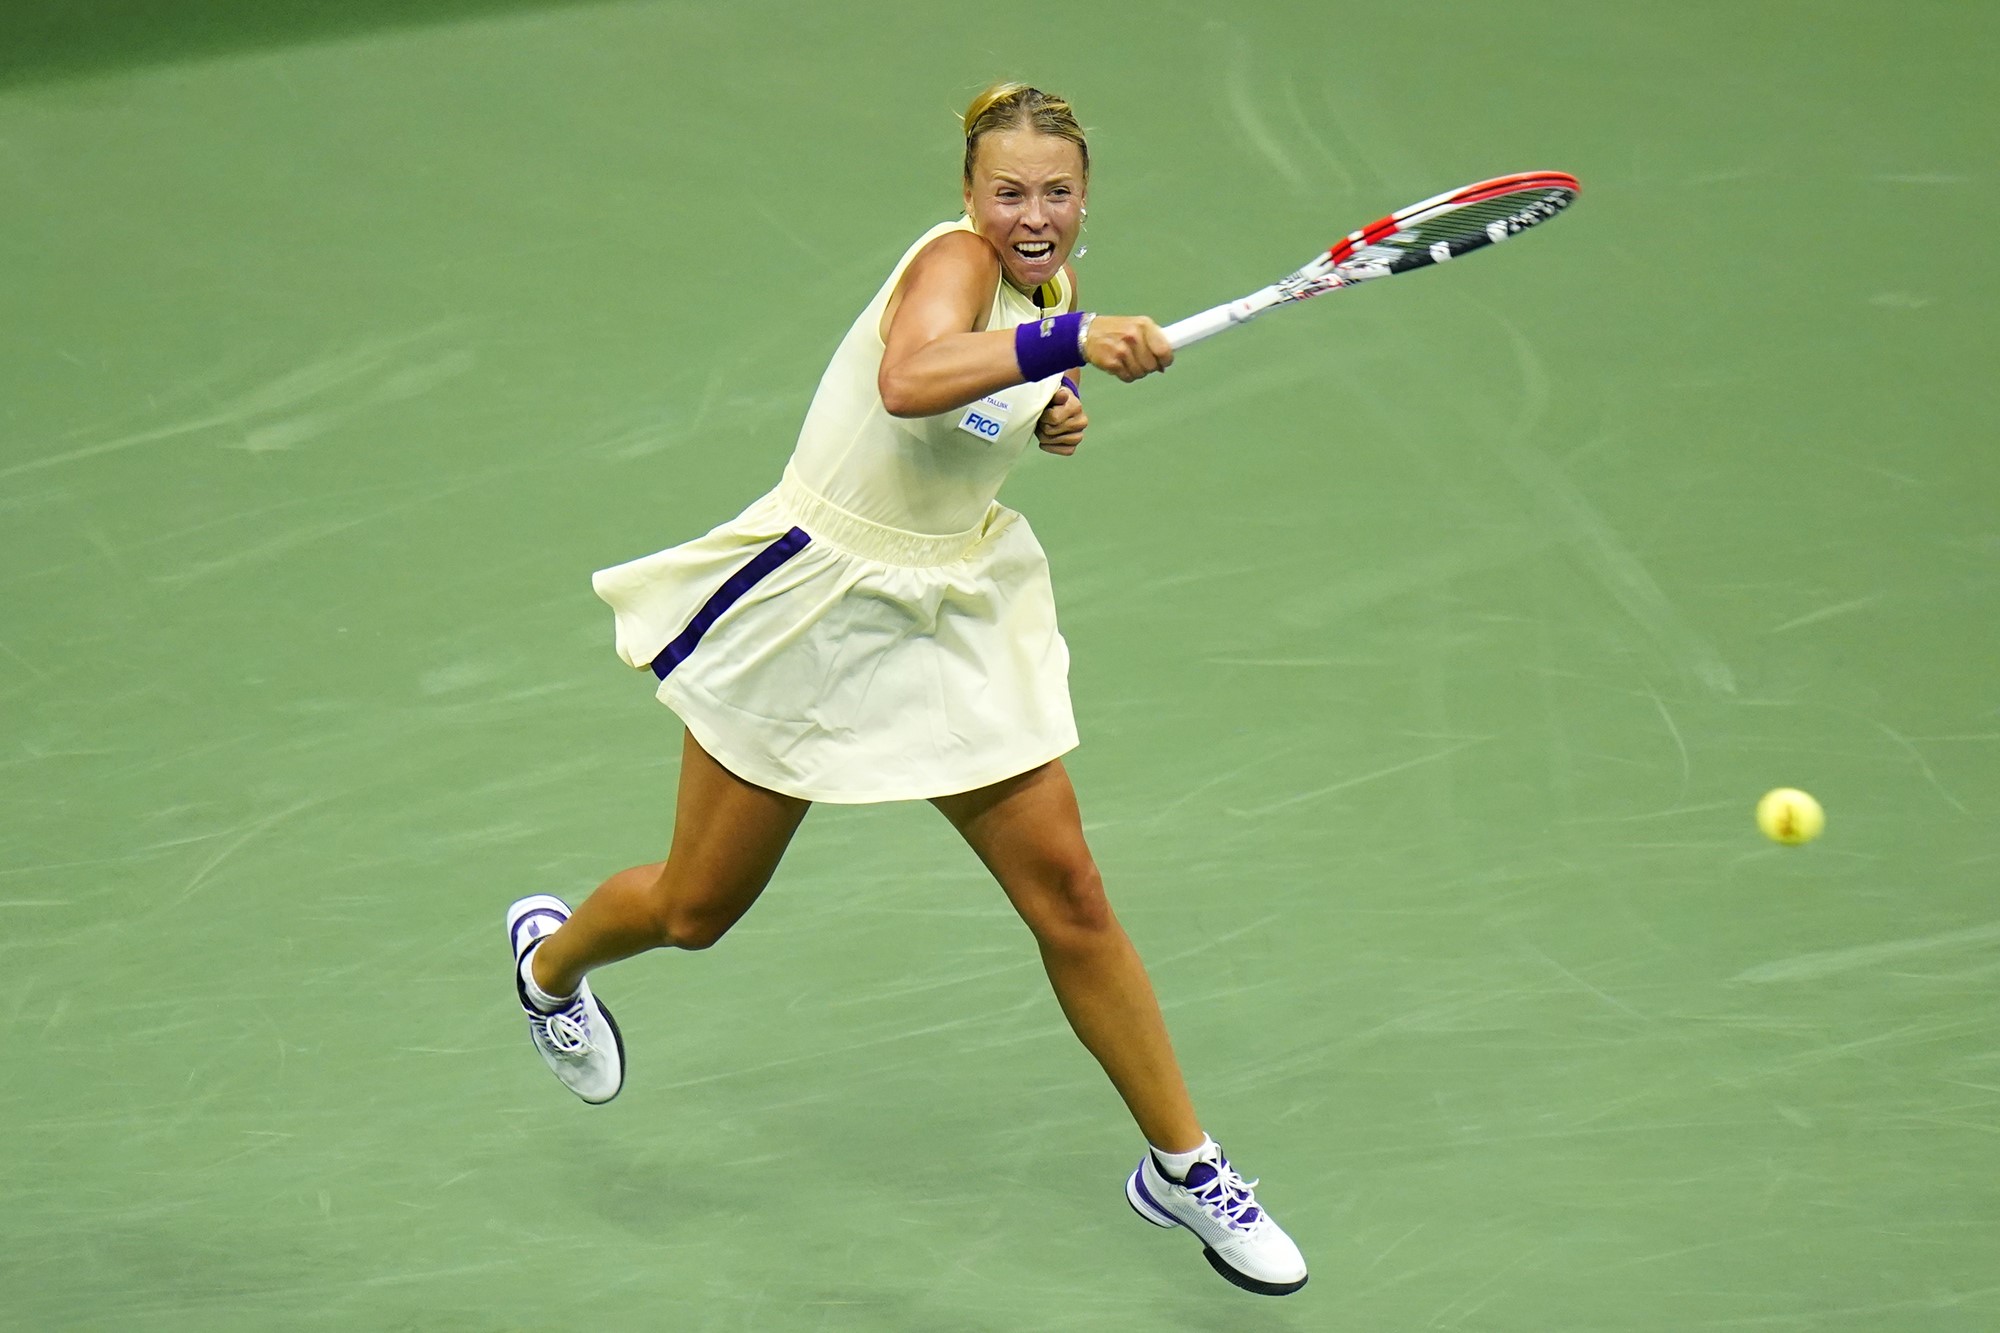 A woman in a green tennis outfit hits the ball with a raquet.